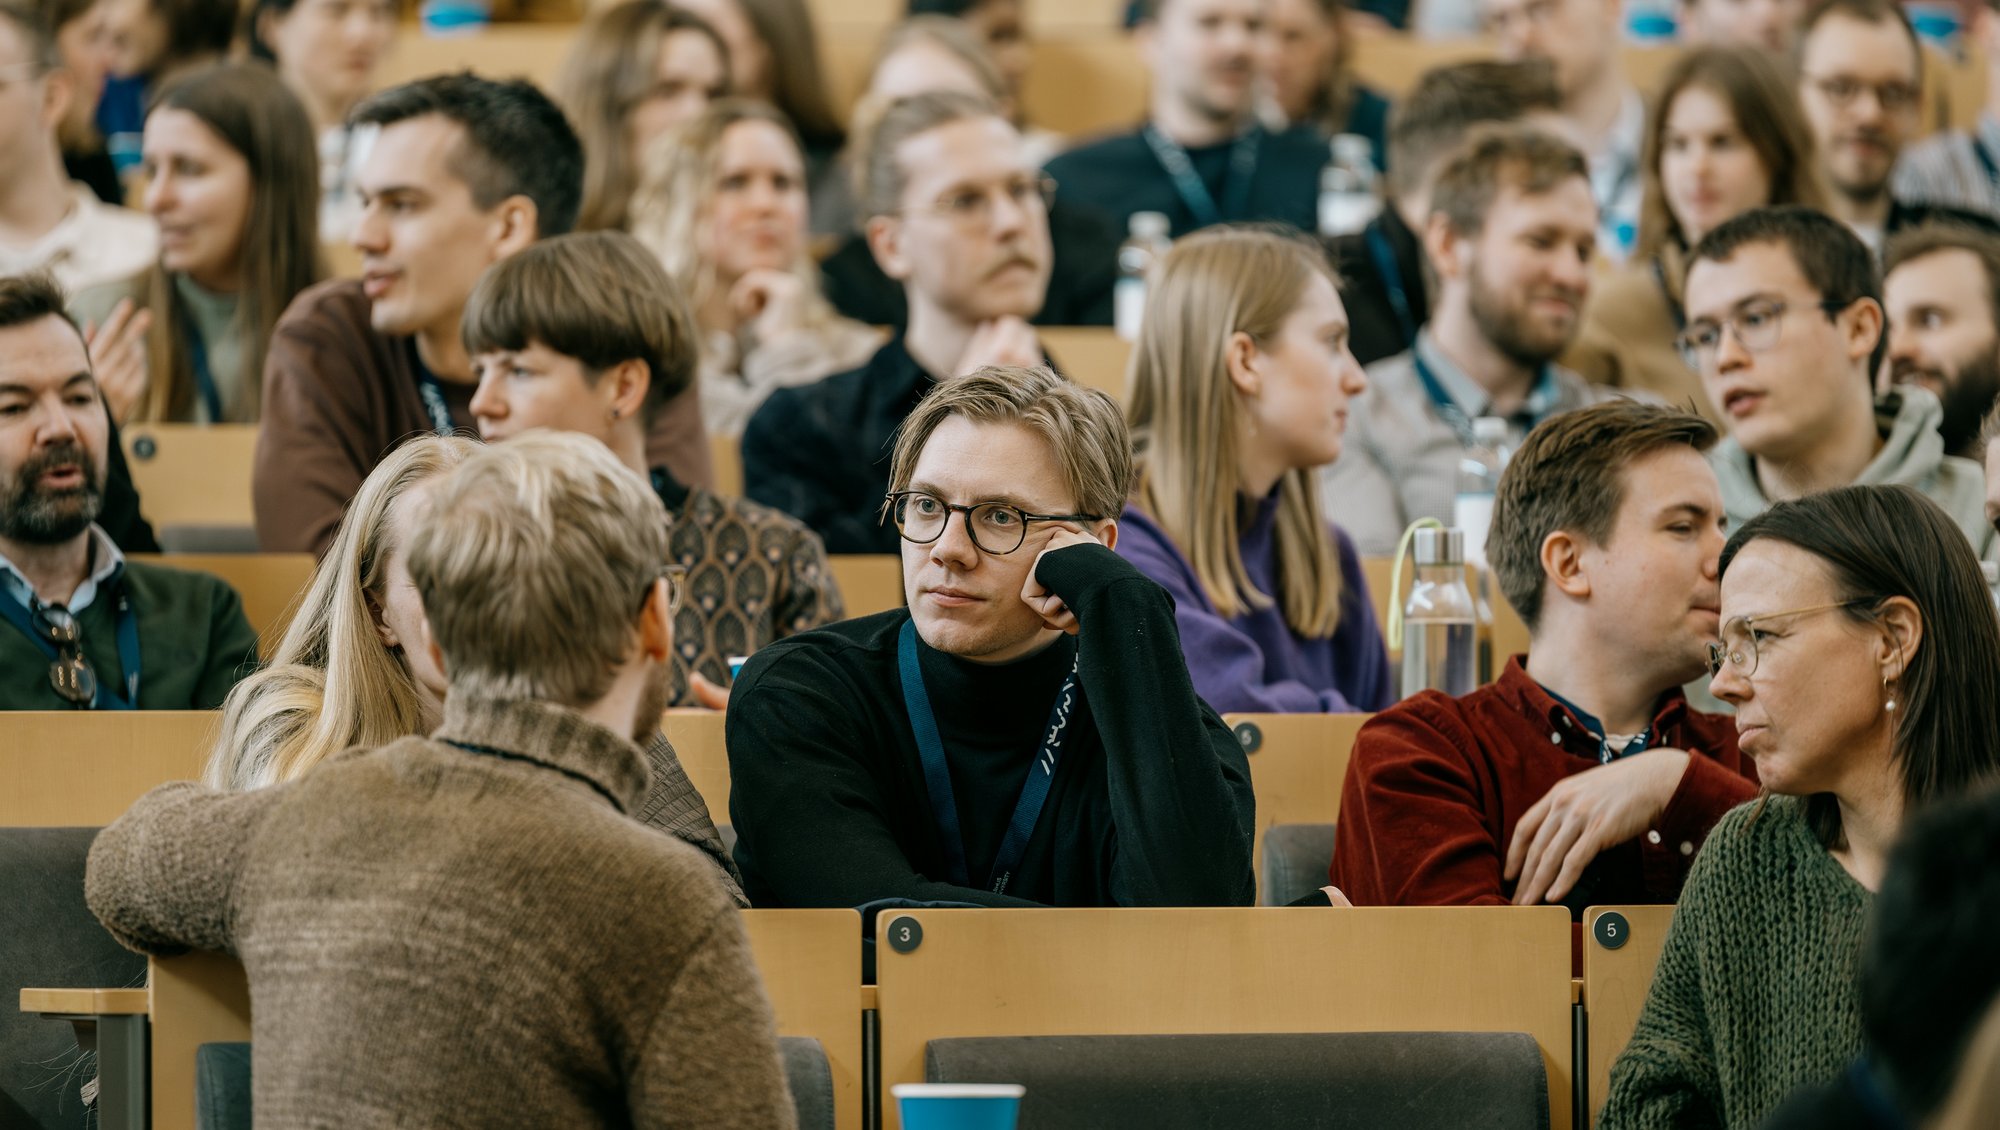 There is an eager discussion in the hall. Photo: Jens Hartmann Schmidt, AU Photo.